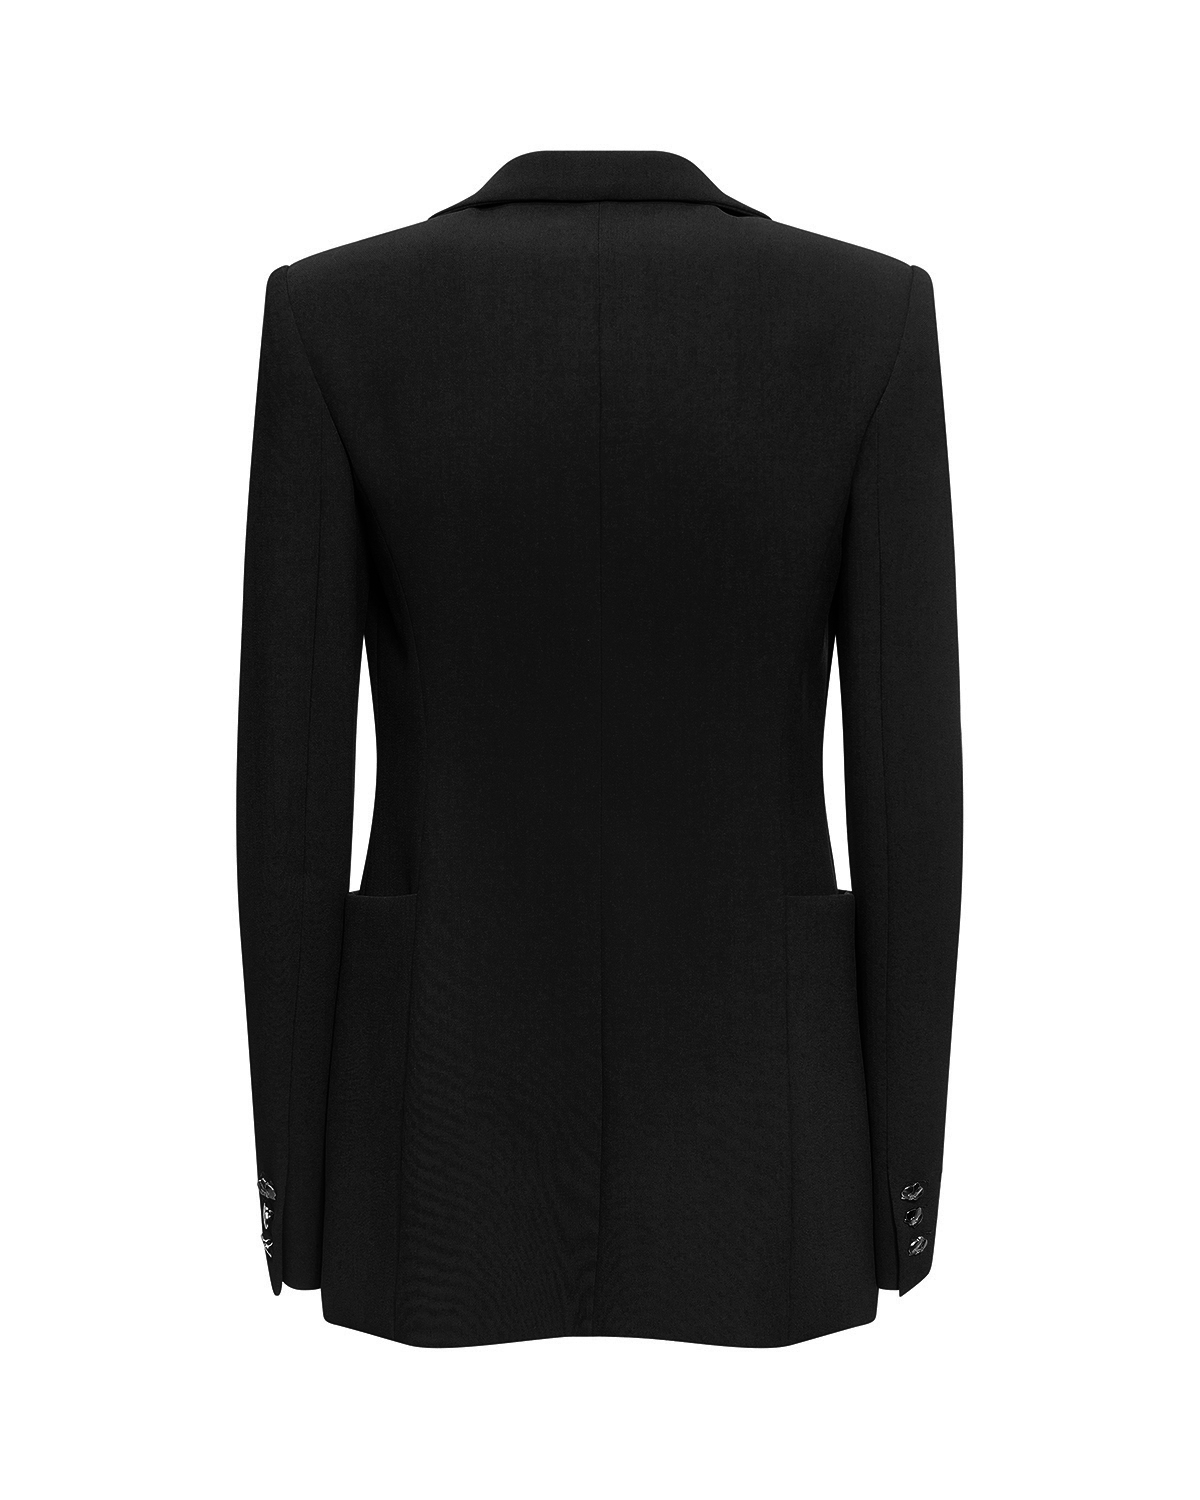 Cady stretch tailored jacket | Private sale | Genny